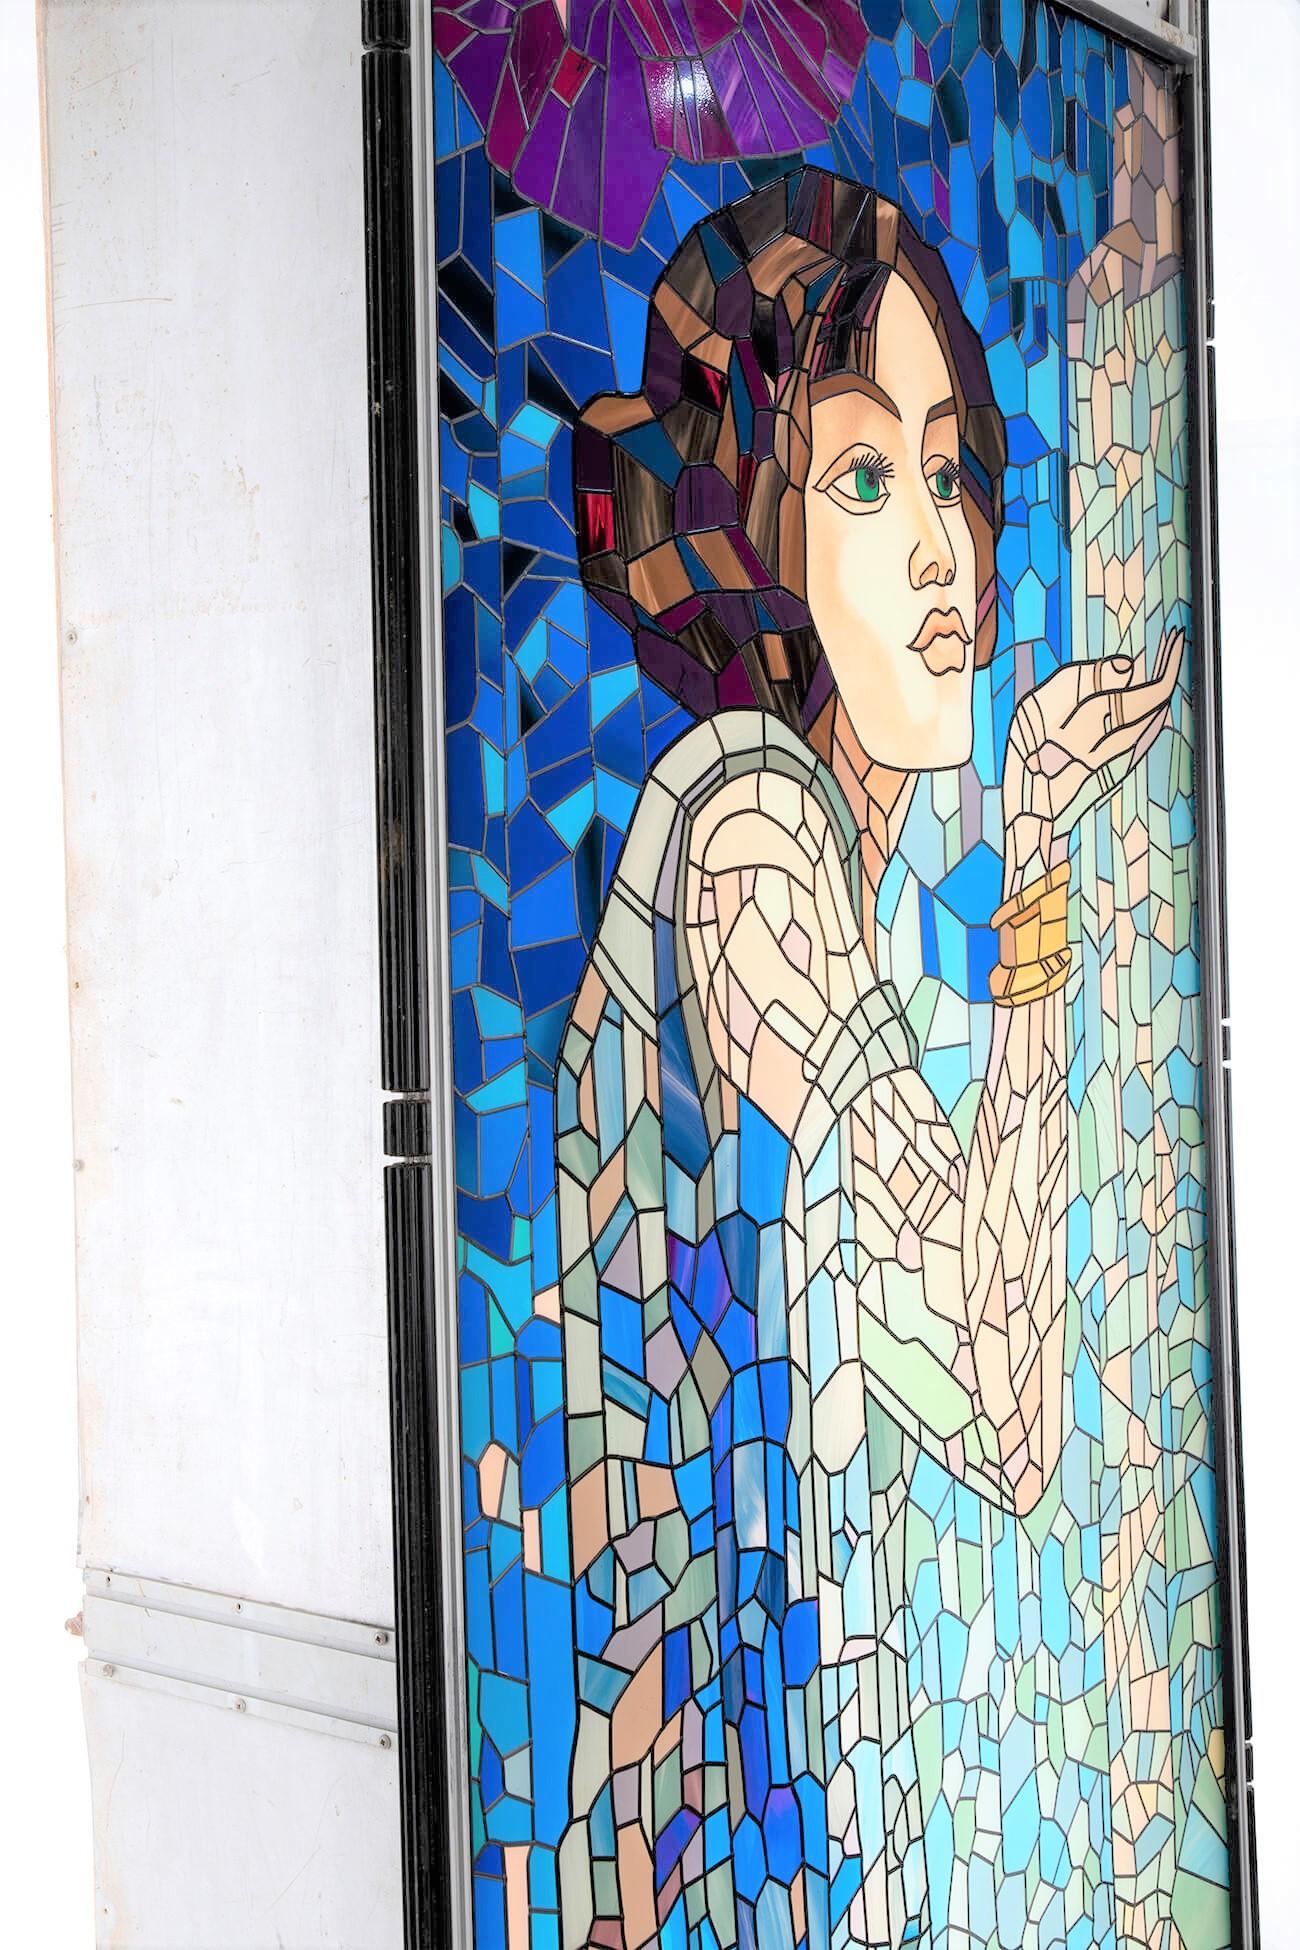 Stained glass designer lightbox featuring a gorgeous image of a woman blowing a kiss. Floorstanding and completely captivating, a one-off piece perfect for an interior design project. Please note we have included images of the lightbox when switched